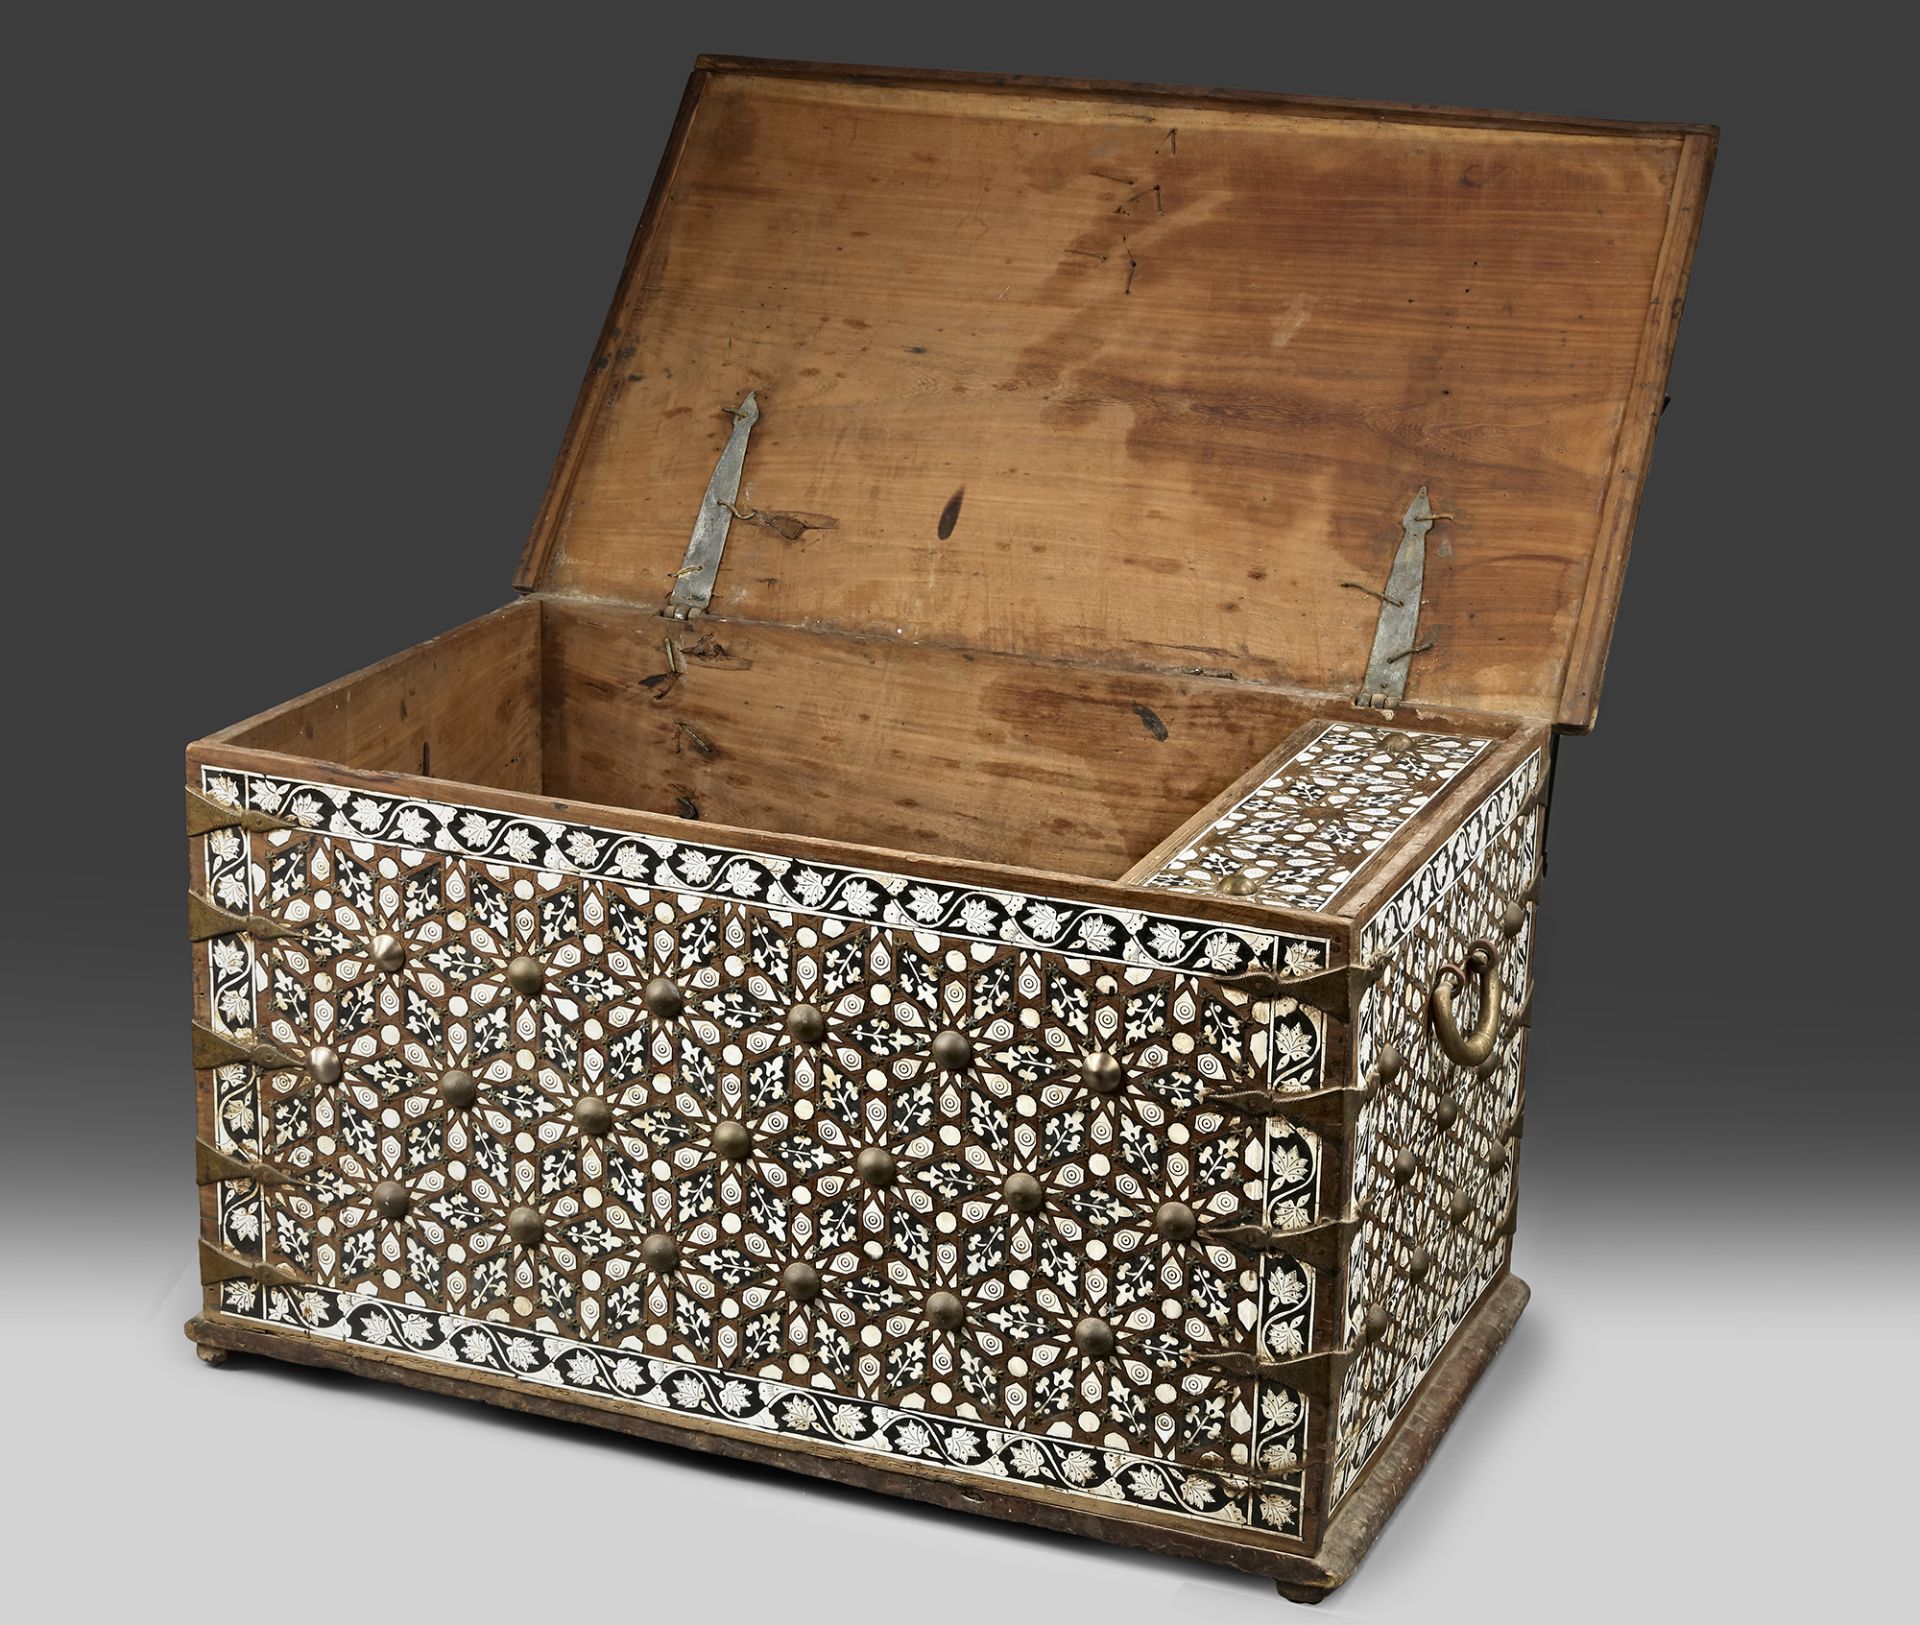 A LARGE OTTOMAN BONE INLAID WOODEN CHEST, SYRIA, LATE 19TH-EARLY 20TH CENTURY - Bild 2 aus 5